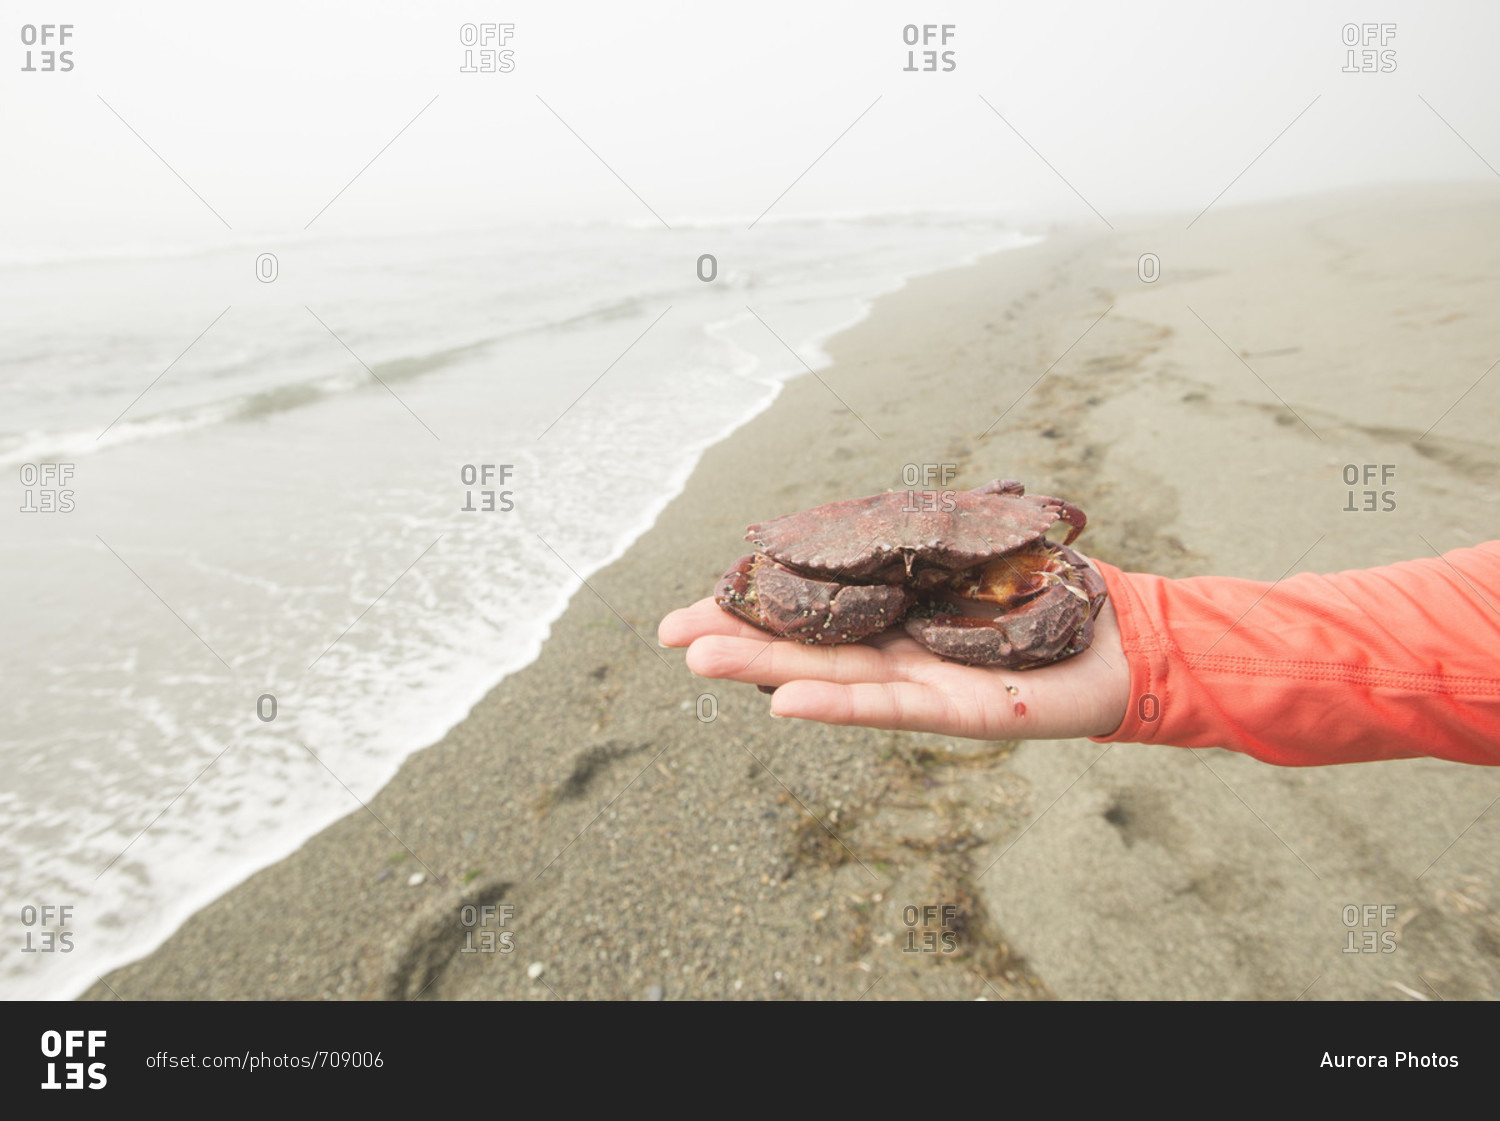 Hiker holding dead red crab (Cancer productus) found at beach, West Coast Trail, British Columbia, Canada